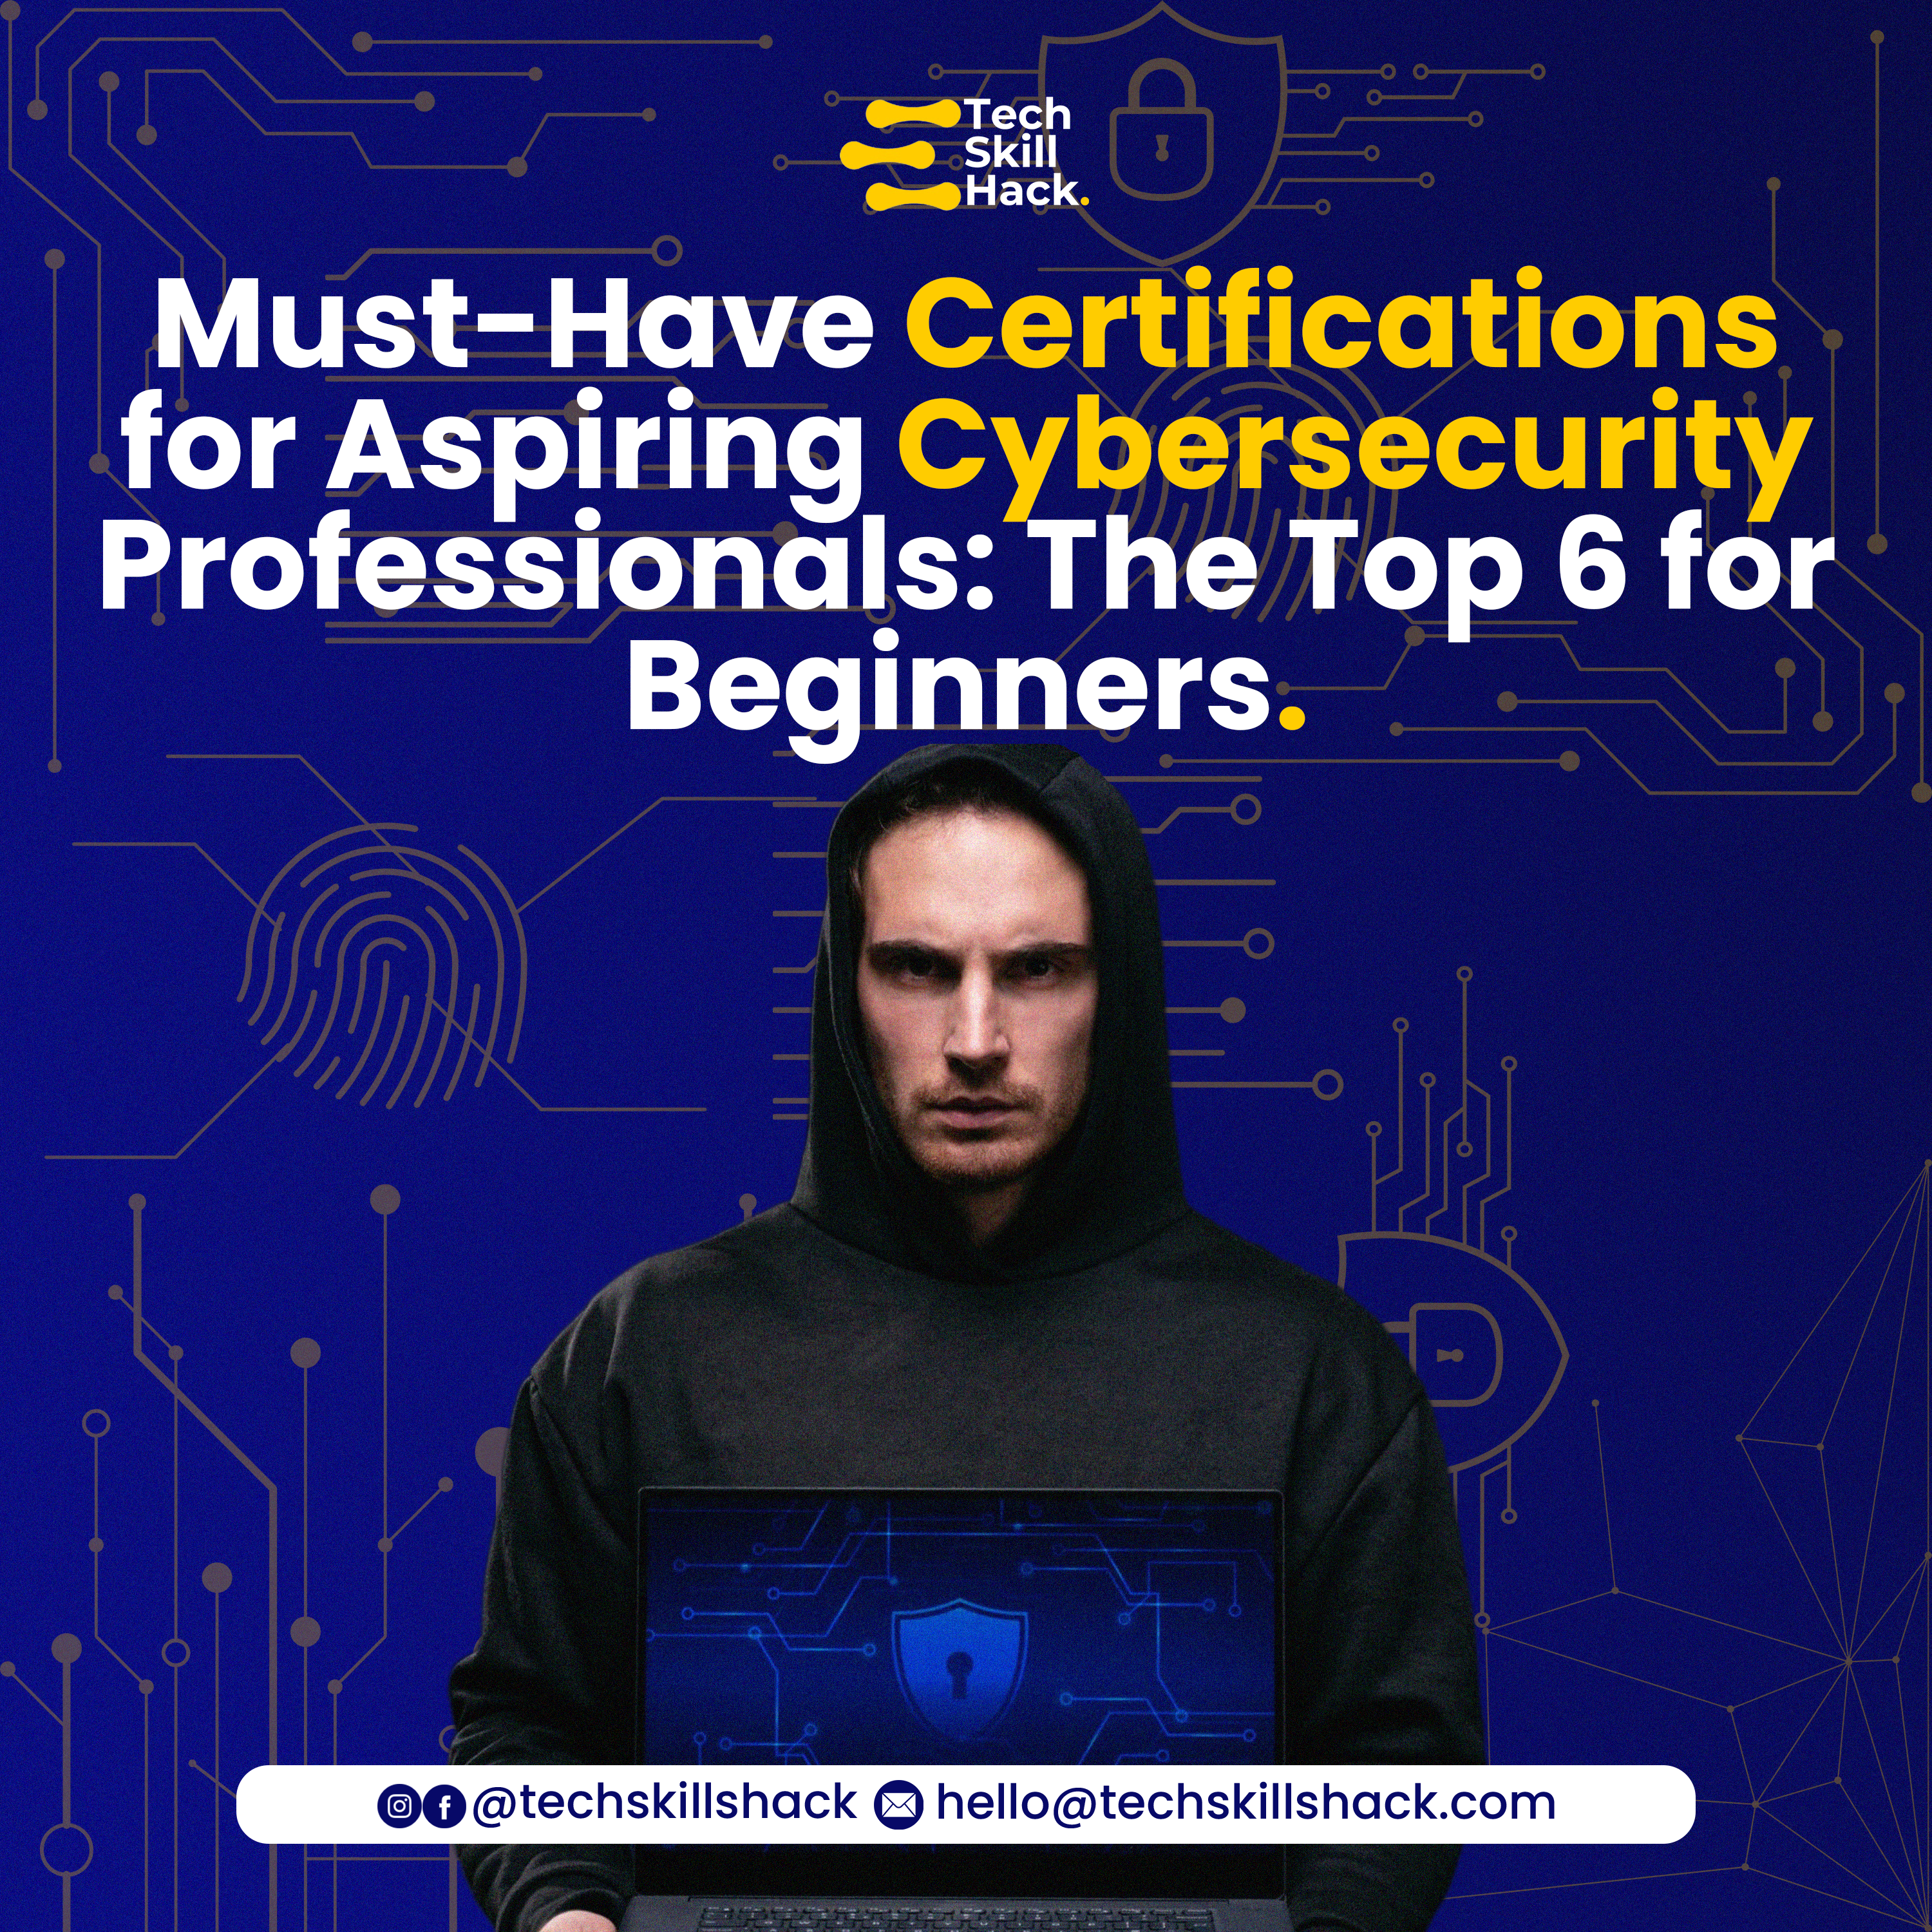 Must-Have Certifications for Aspiring Cybersecurity Professionals: The Top 6 for Beginners